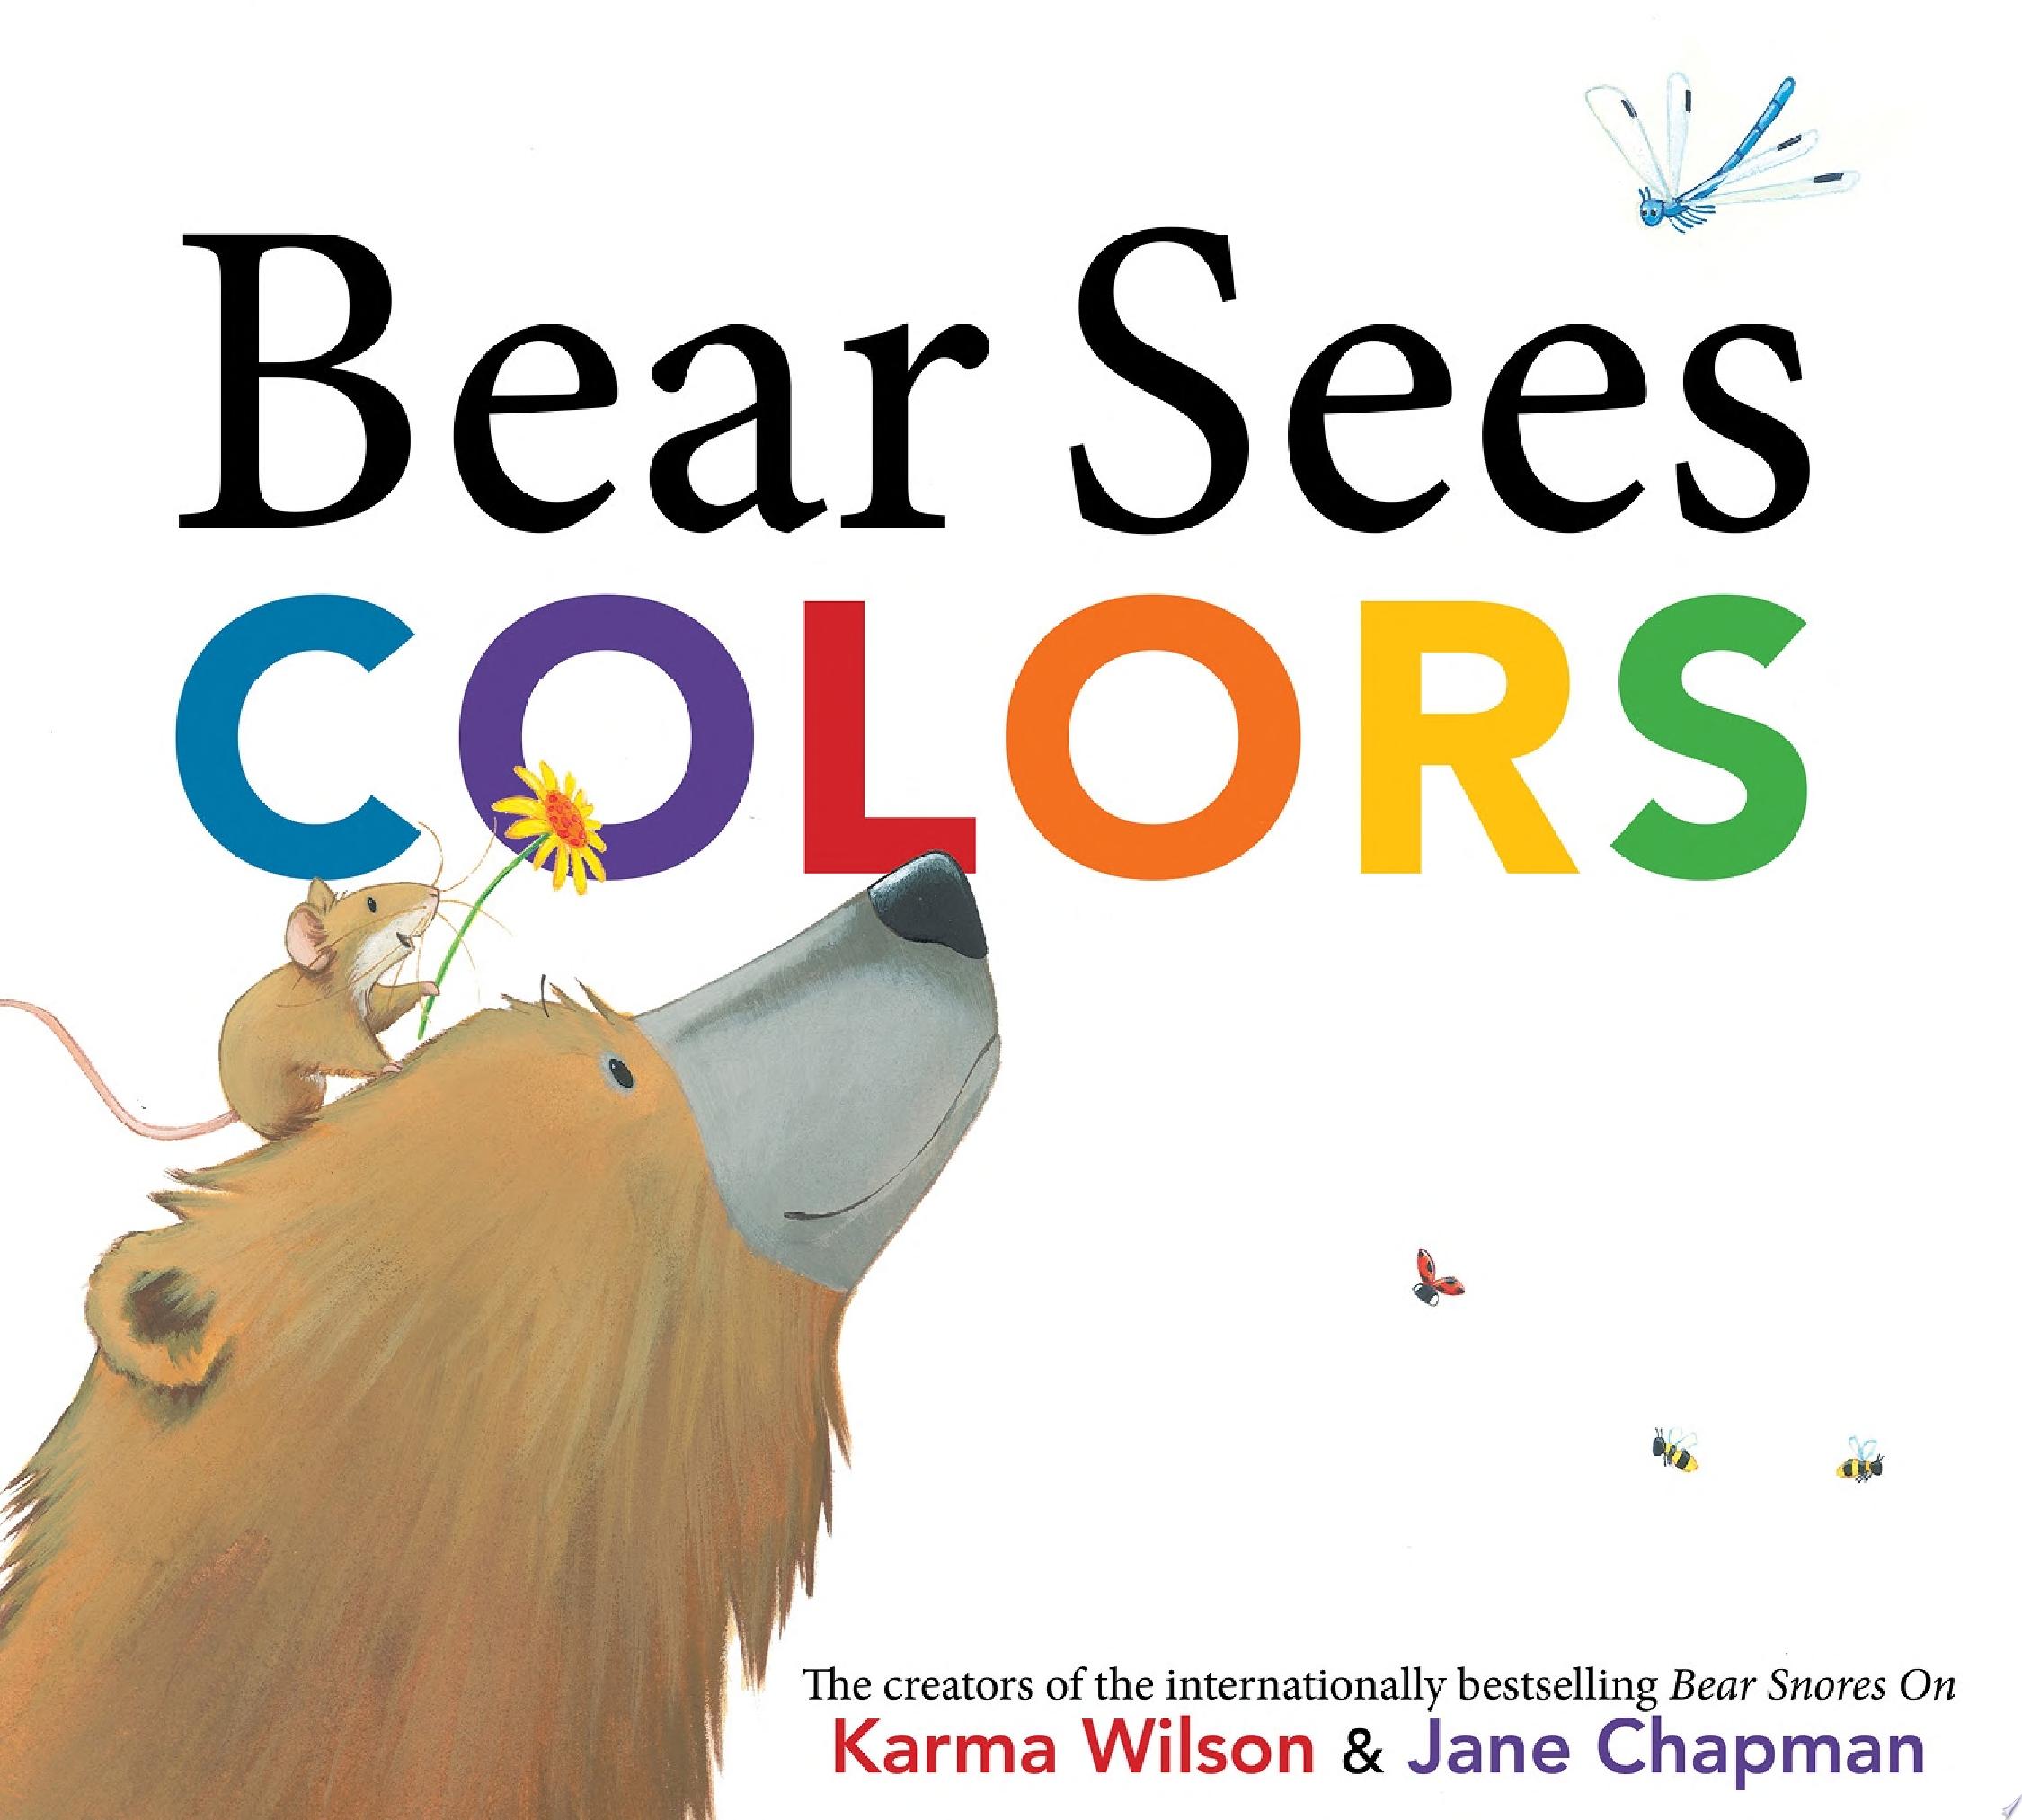 Image for "Bear Sees Colors"